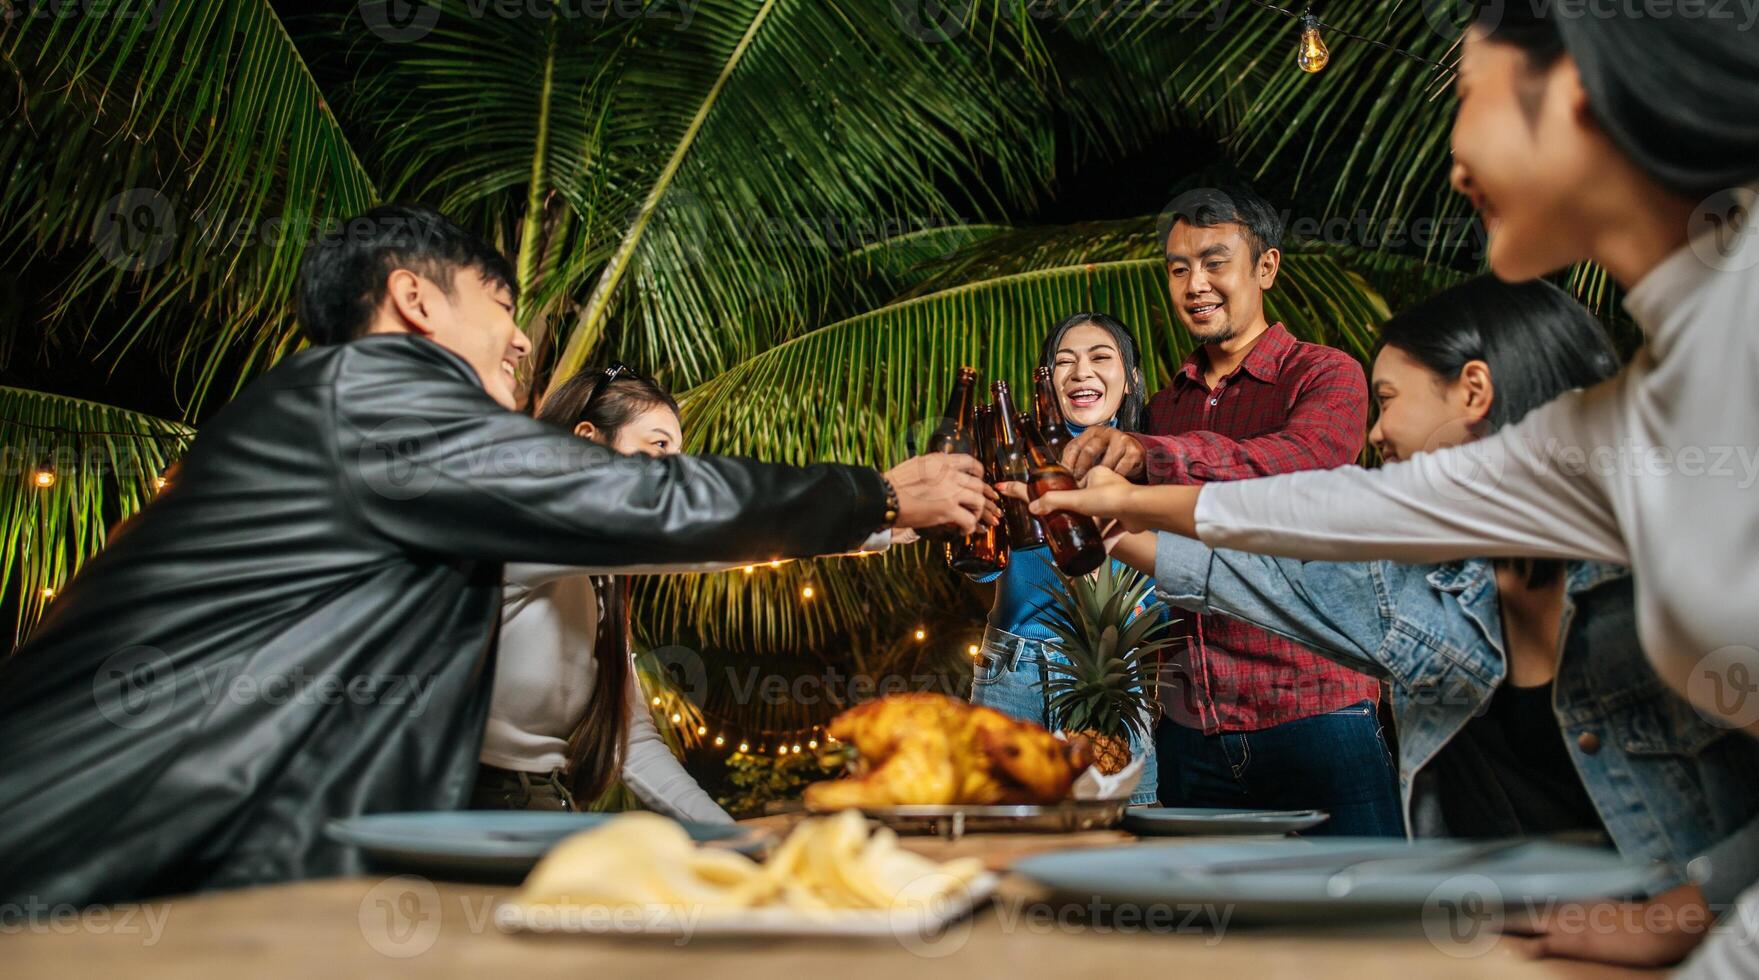 Portrait of Happy Asian friends having dinner party together - Young people sitting at bar table toasting beer glasses dinner outdoor  - People, food, drink lifestyle, new year celebration concept. photo